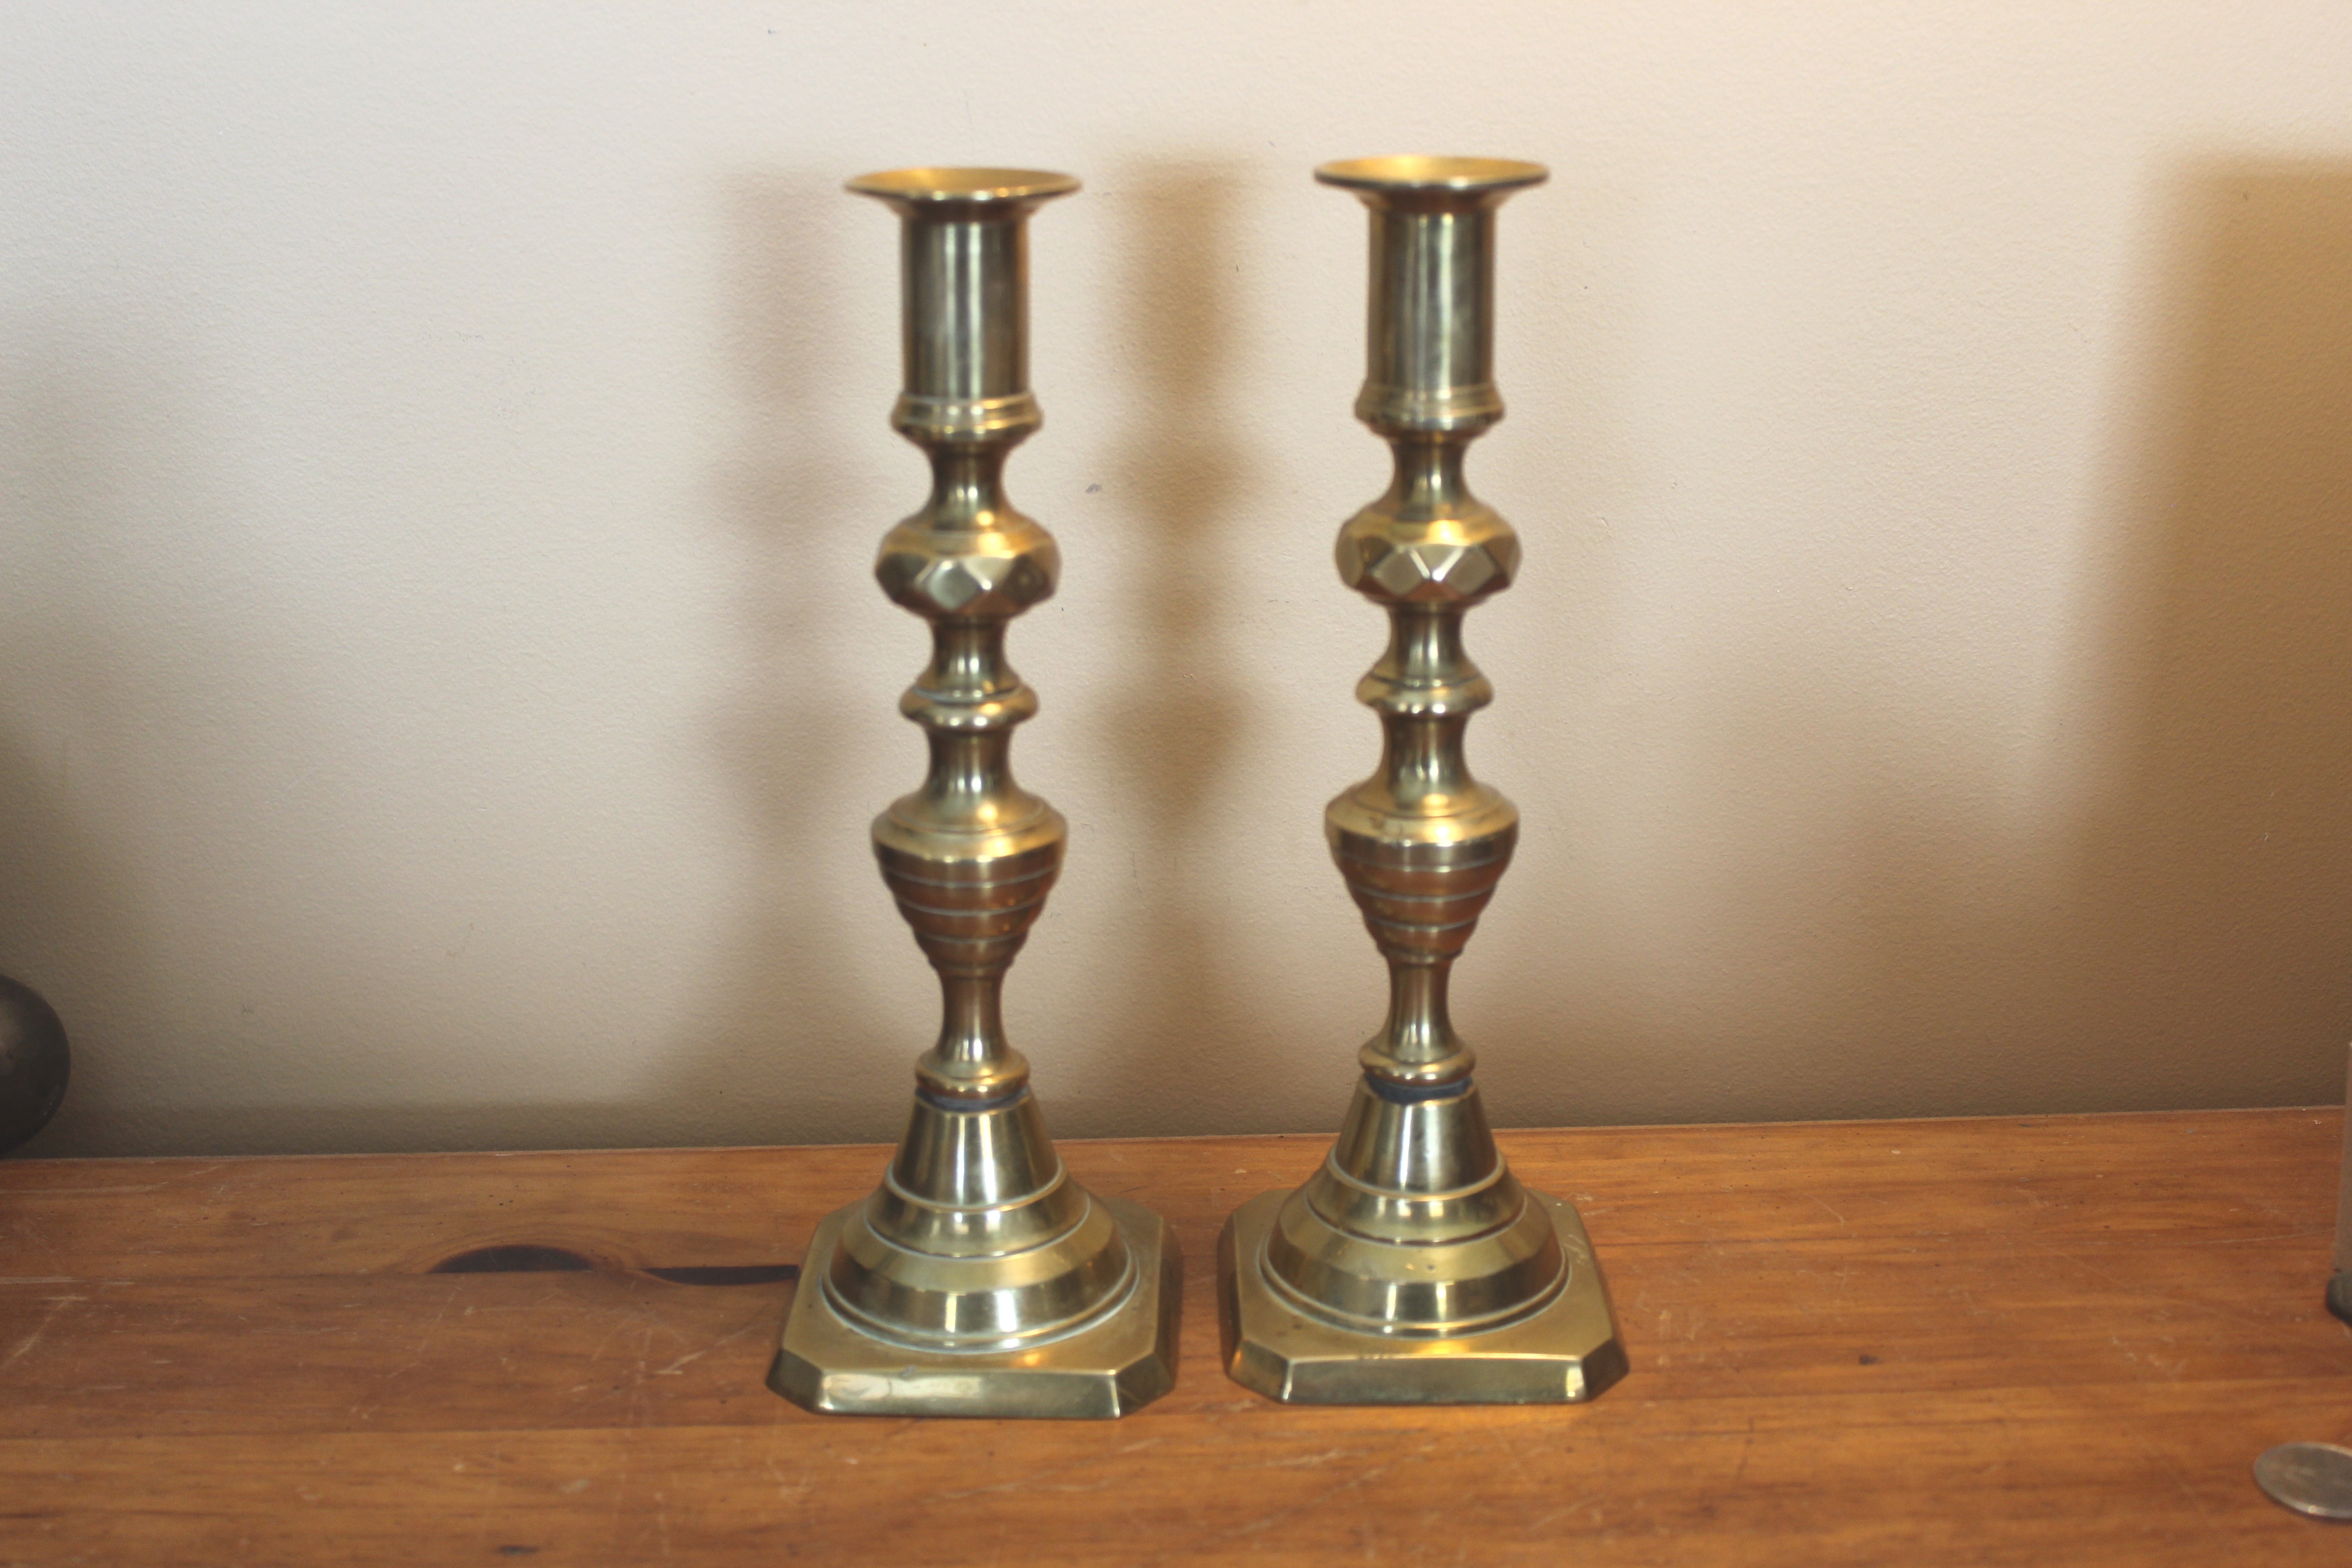 Brushed Brass Candlestick